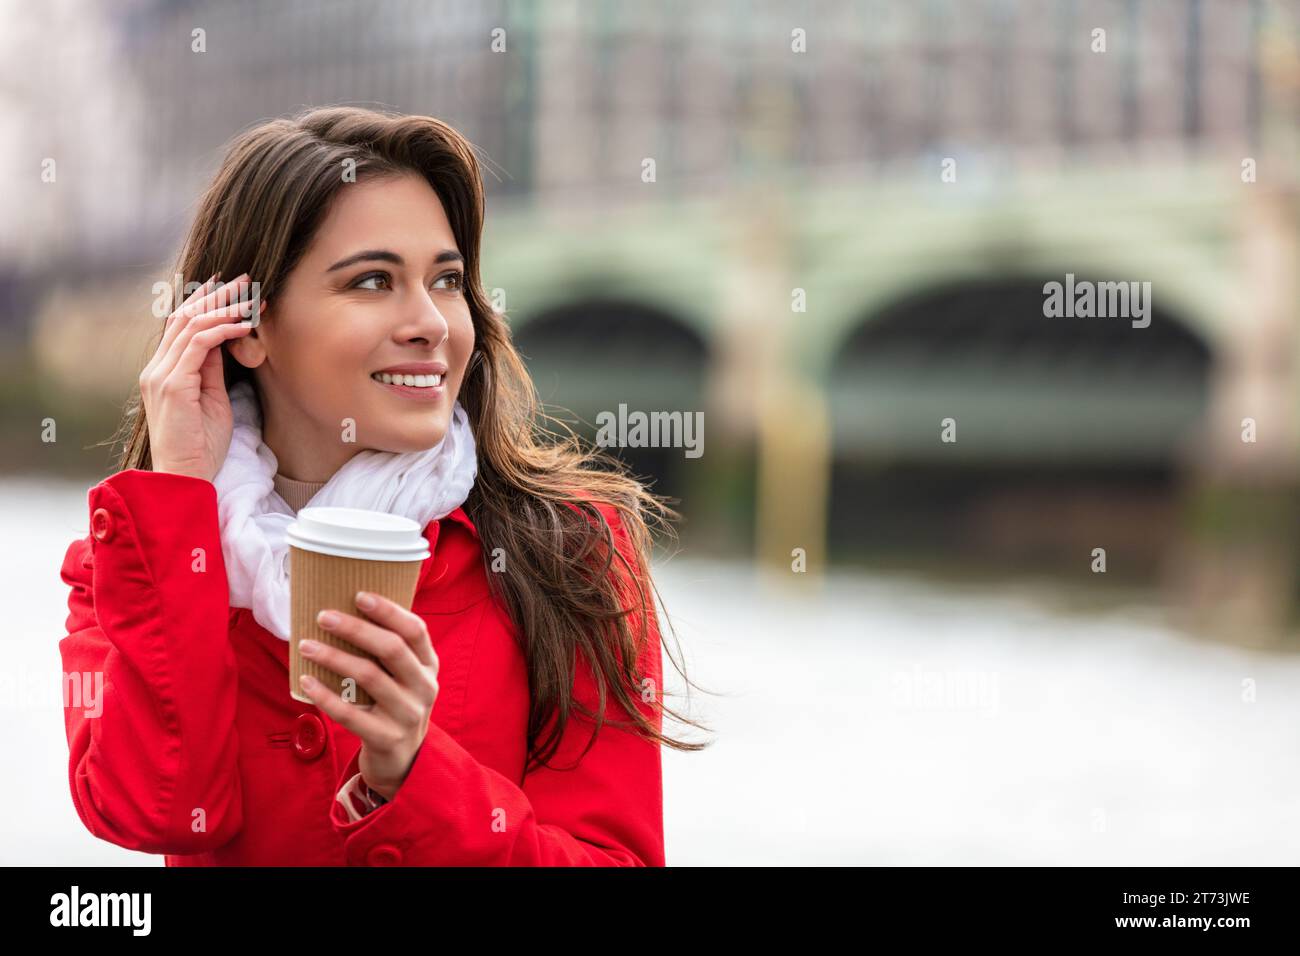 Girl or young woman drinking coffee in a disposable cup by Westminster Bridge in the background, London, England, Great Britain Stock Photo